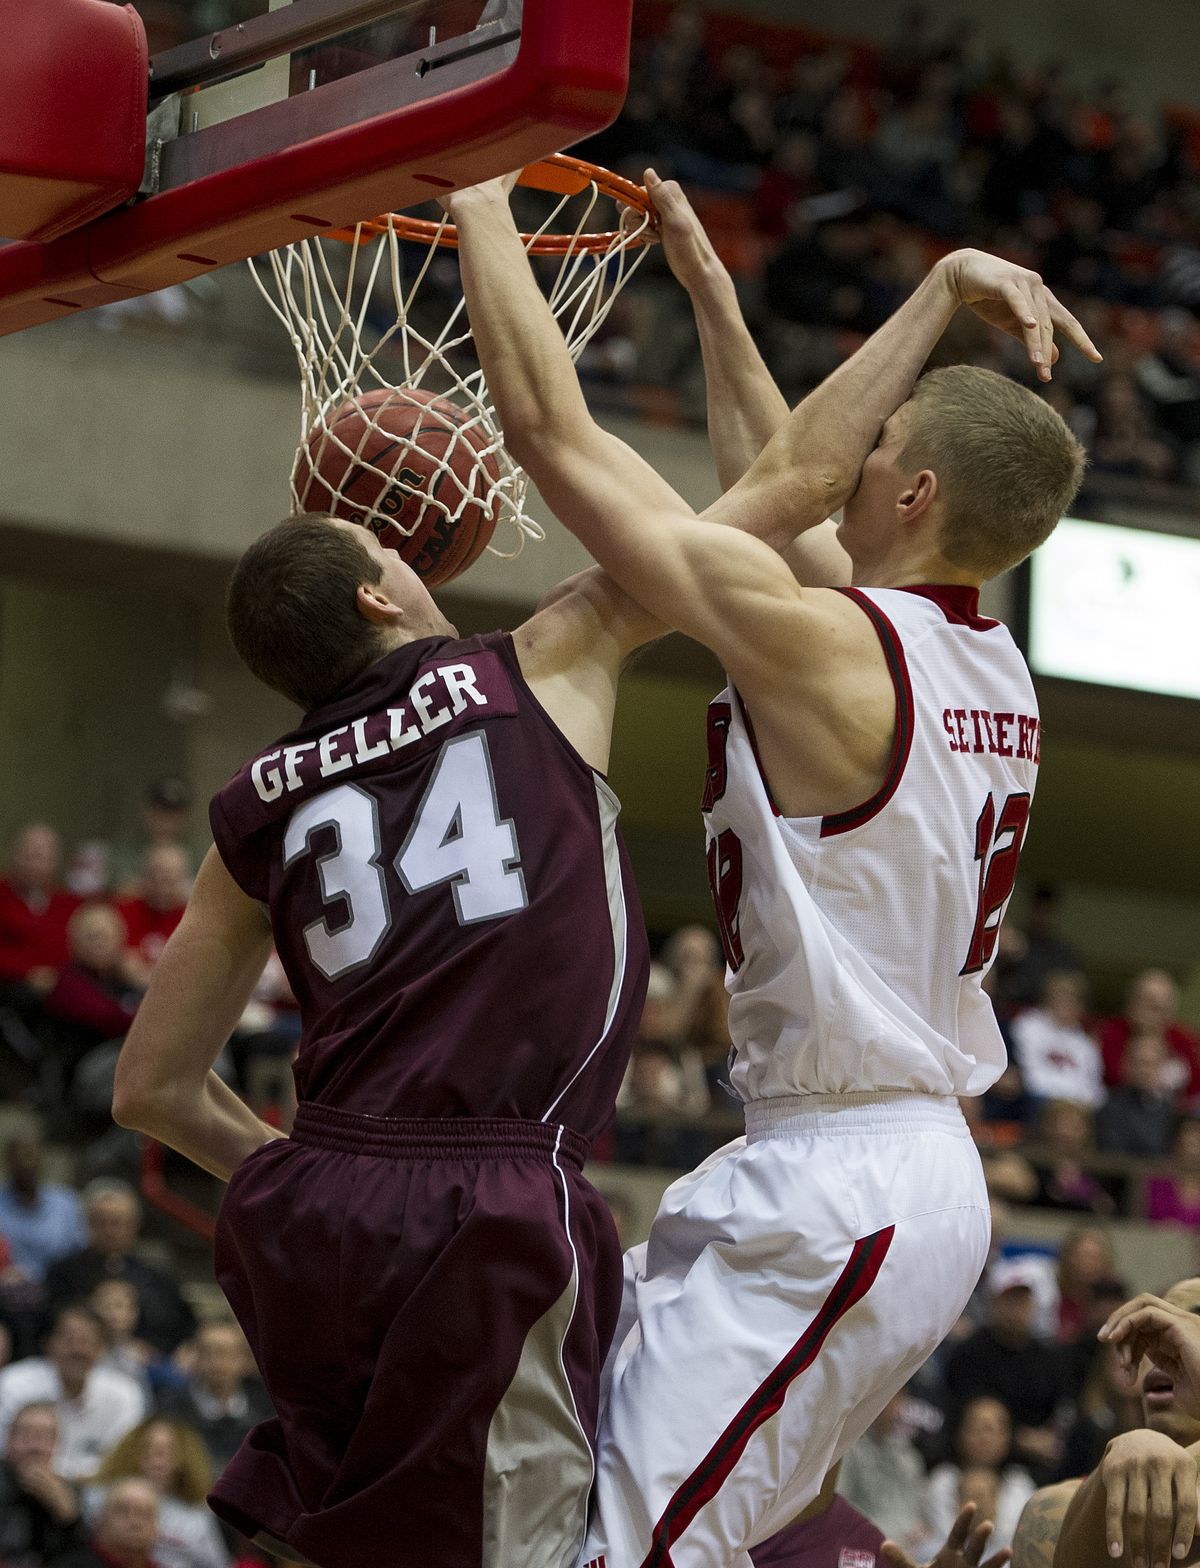 EWU’s Martin Seiferth, right, dunks the ball in the face of Montana’s Brandon Gfeller in the second half. (Colin Mulvany)